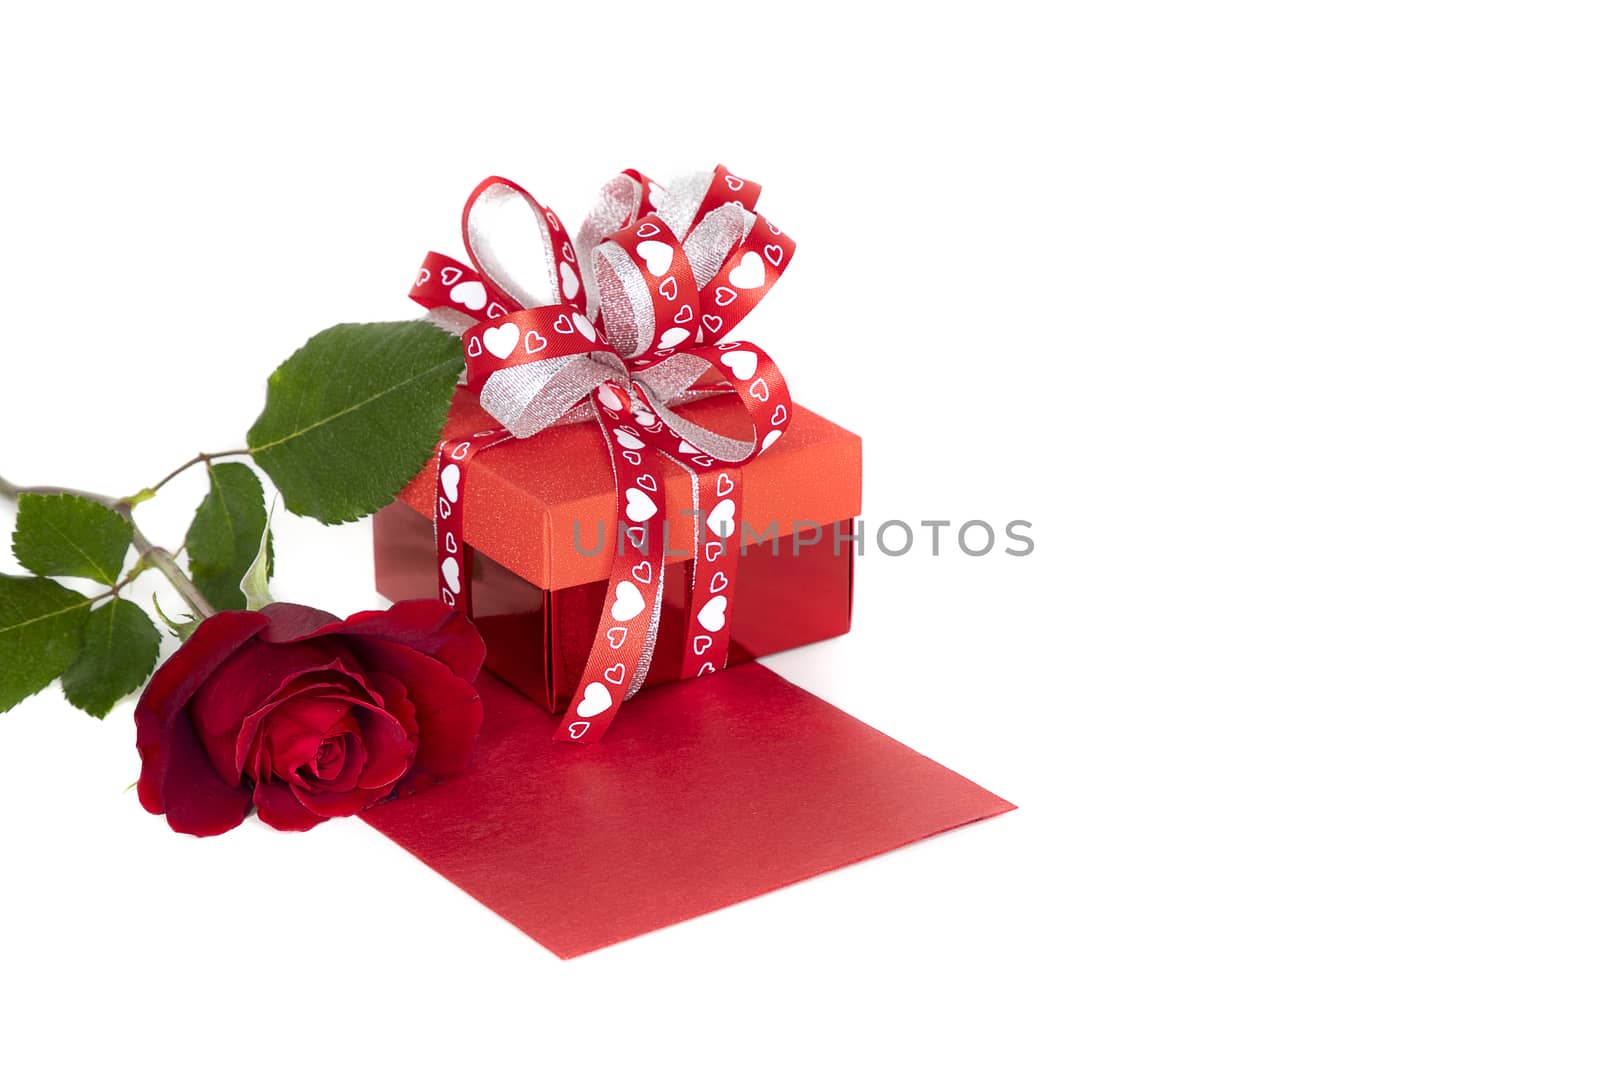 Beautiful red rose and red present box with red envelope, isolated on white background.